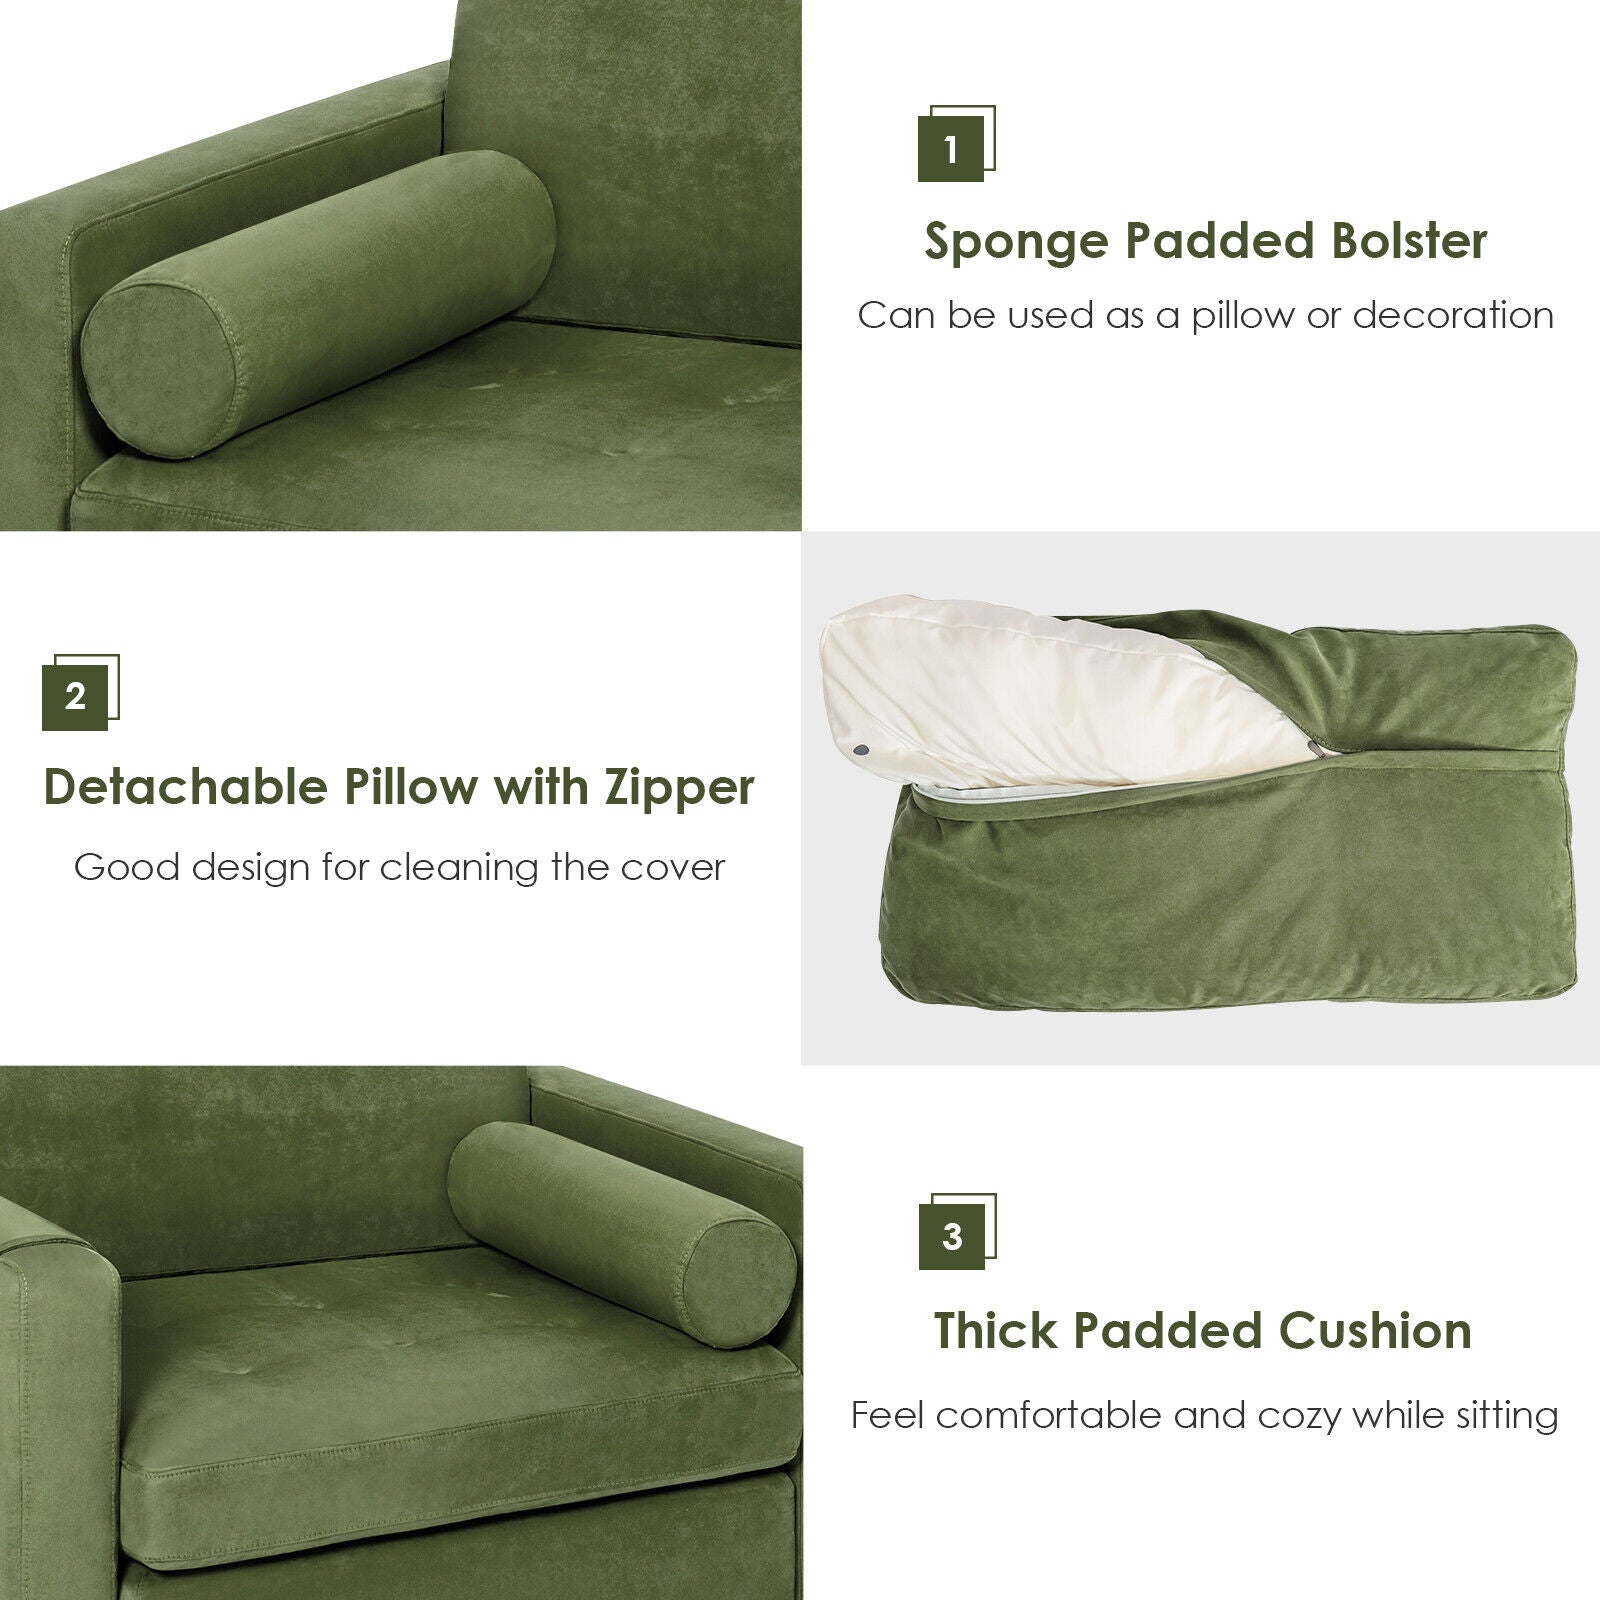 Detachable Pillow and Convenient Storage: The detachable back pillow features a zipper and is filled with A-grade cotton, goose-down, and latex particles for optimal support and comfort. The padded bolster, made with a soft sponge, adds an extra touch of coziness. Additionally, our accent chair comes with an armrest caddy holder for magazines or books, along with two convenient pockets to store remote controls.